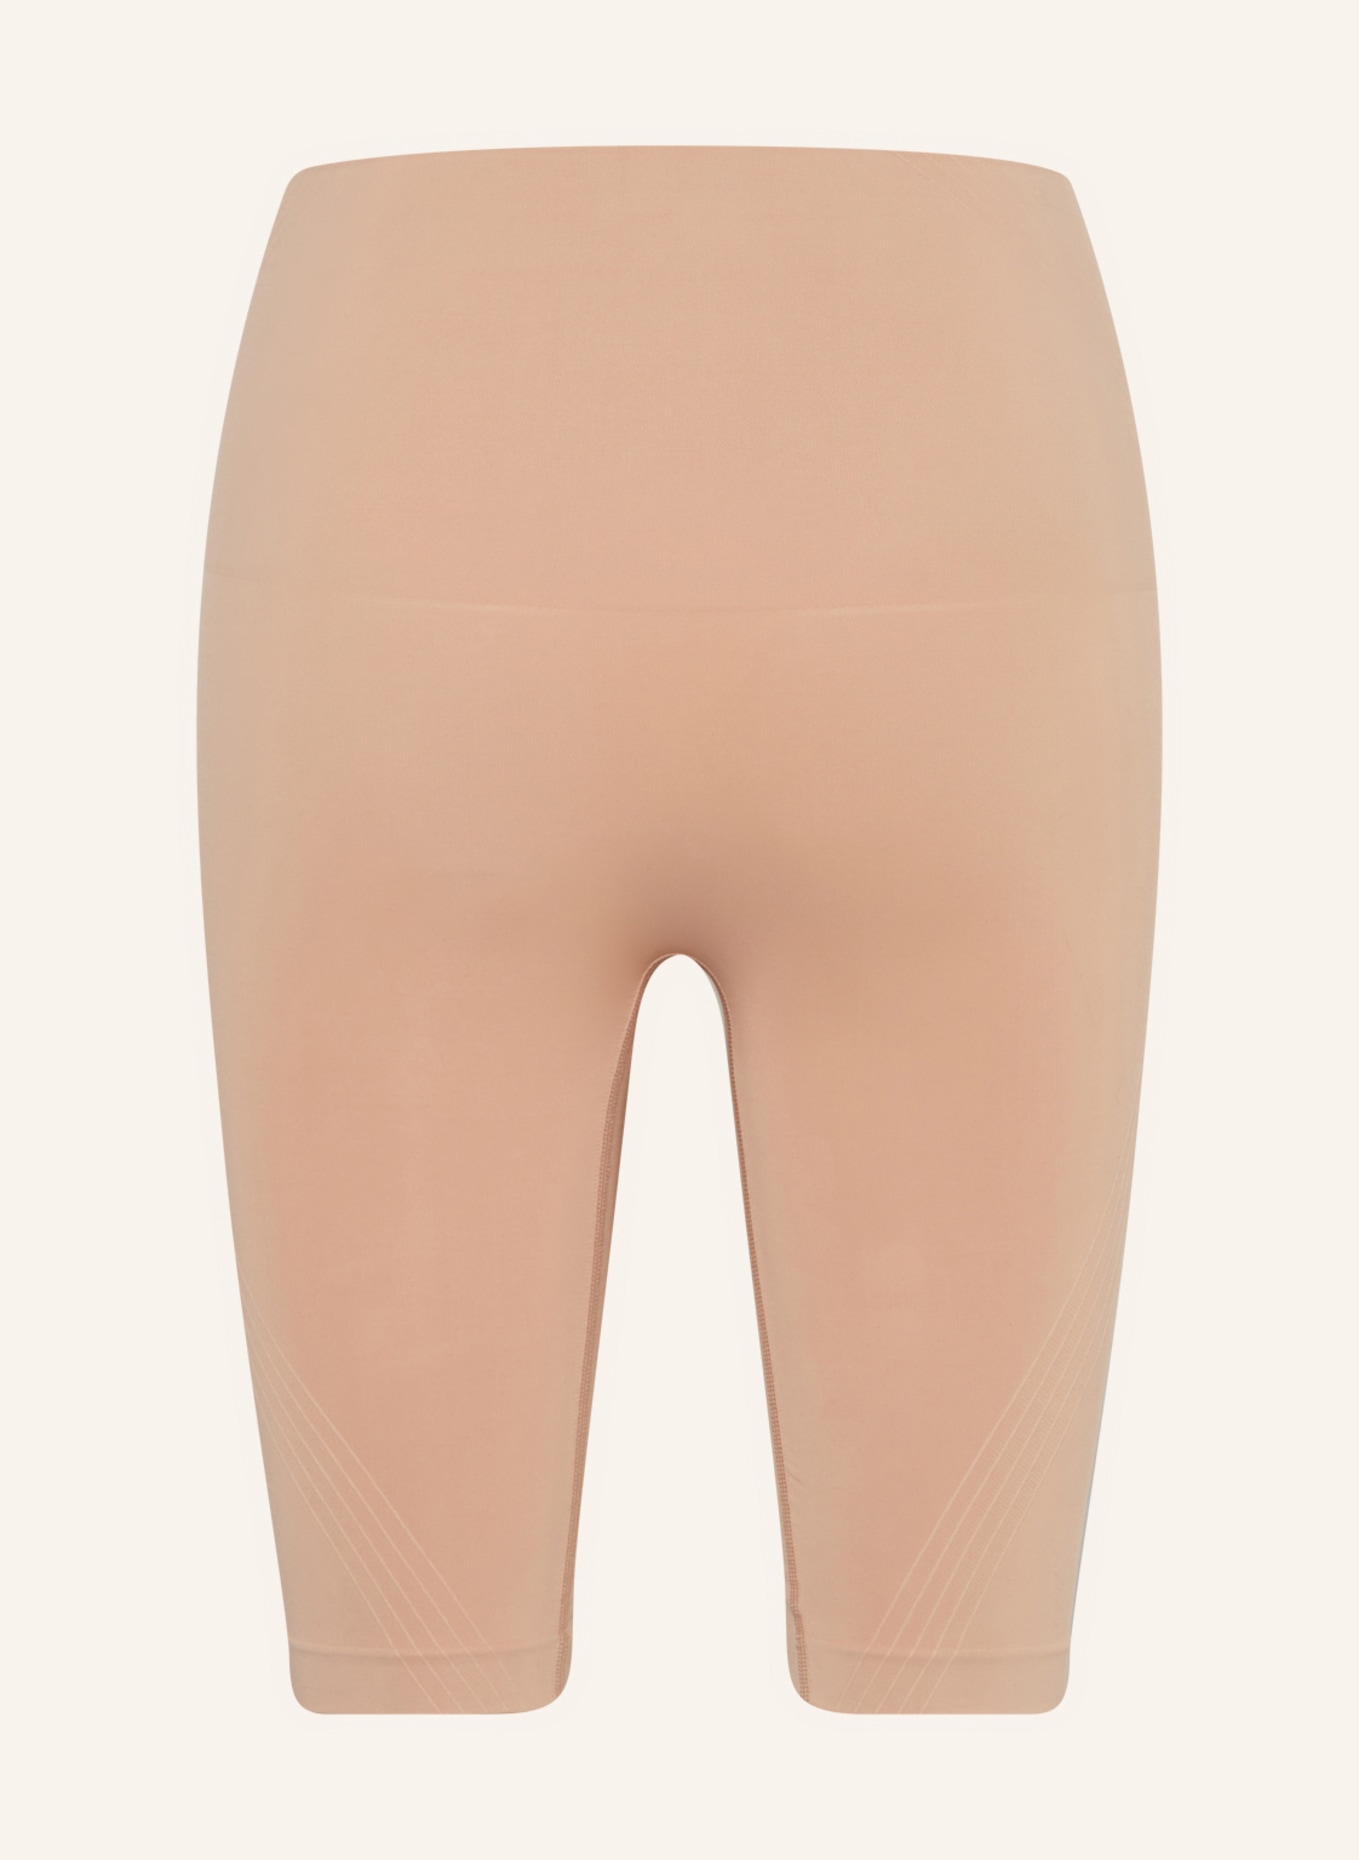 CHANTELLE Shape shorts SMOOTH COMFORT in nude